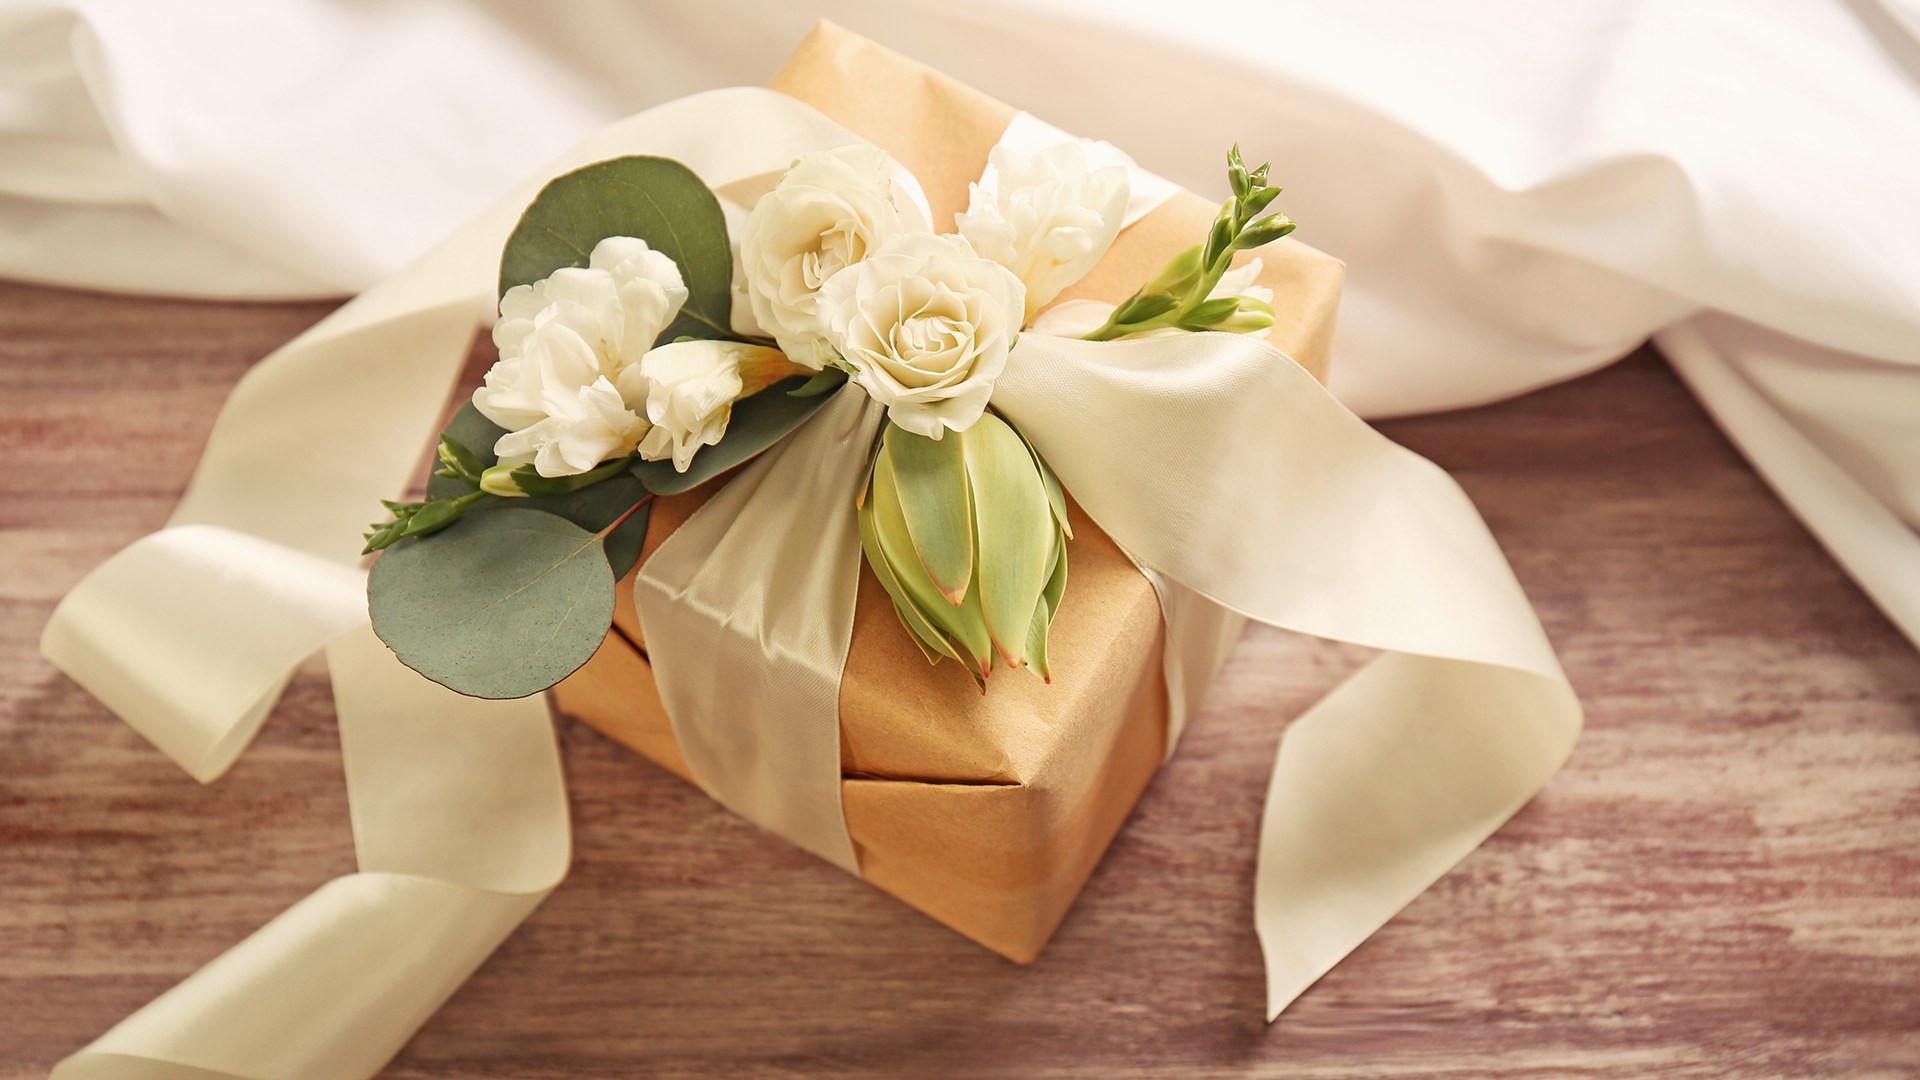 Wedding Gift Ideas Couple
 Top 10 Most Luxurious Wedding Gift Ideas for Wealthy